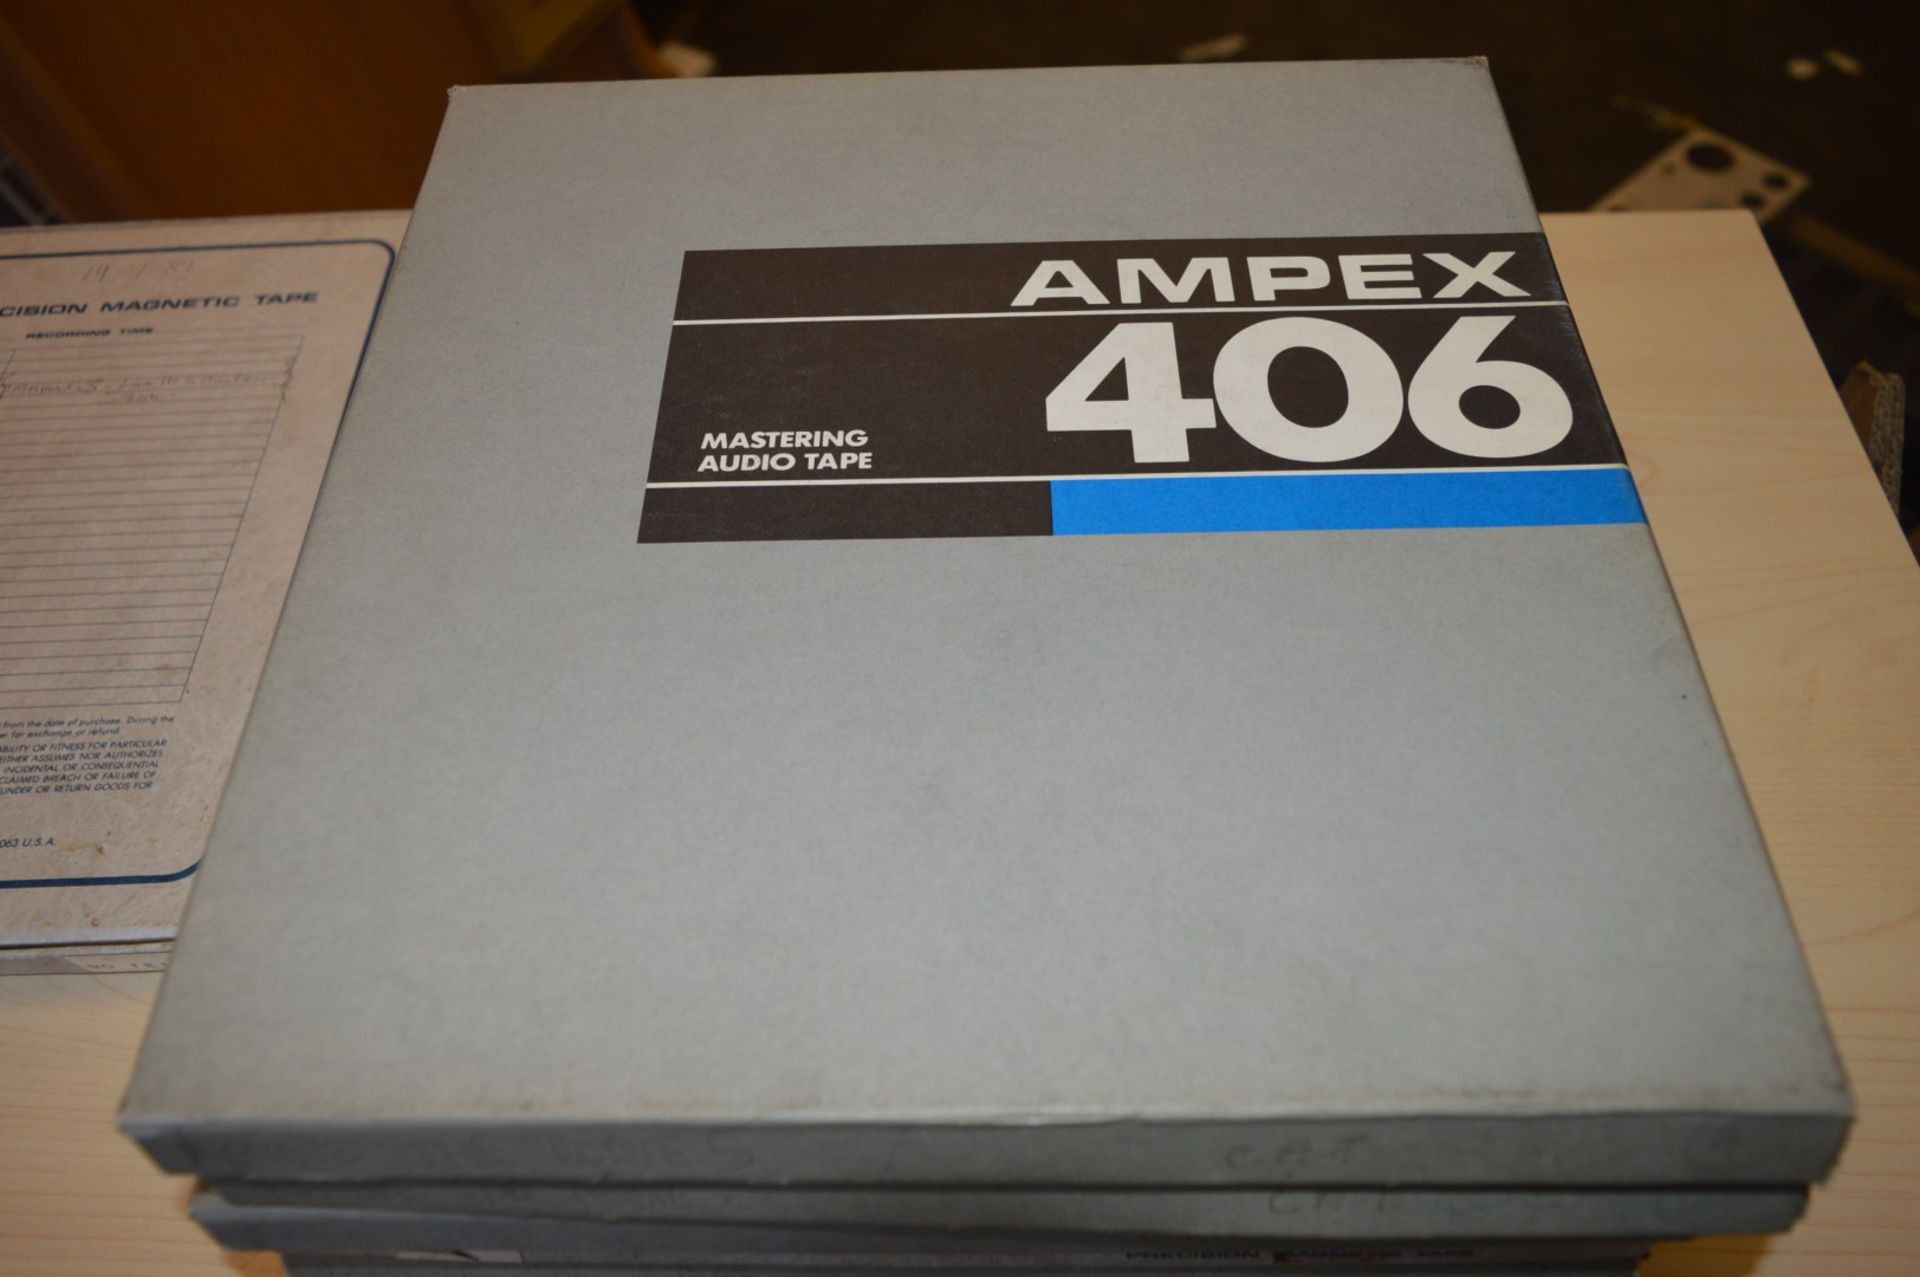 10 x Ampex 406 Reel to Reel Spools With Tape and Original Boxes - CL185 - Ref DRT0039 - Location: - Image 11 of 28